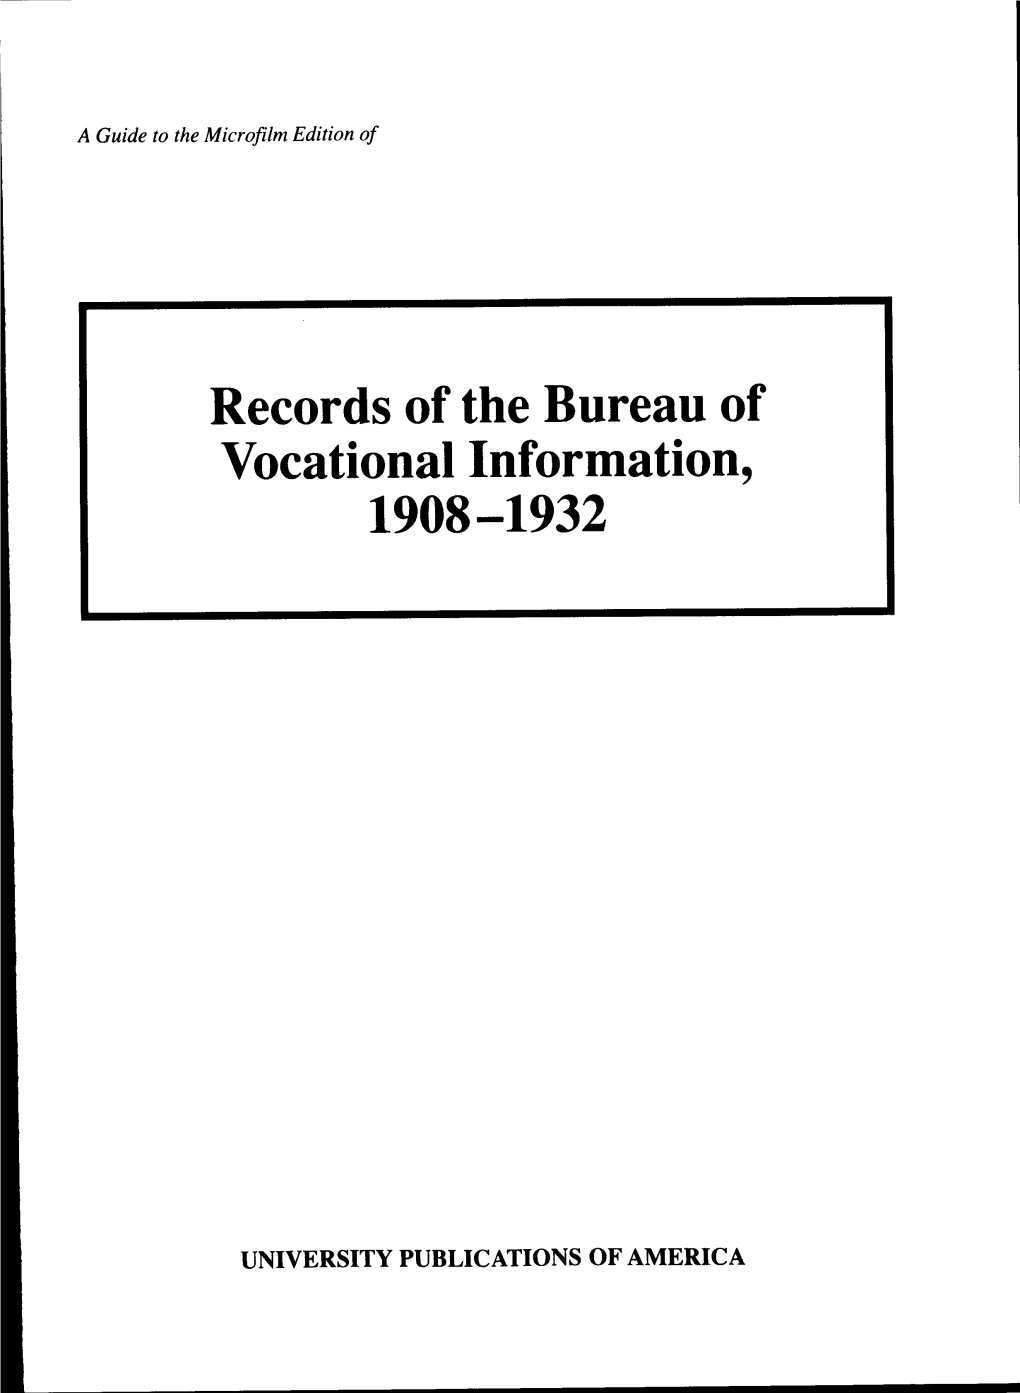 Records of the Bureau of Vocational Information, 1908-1932